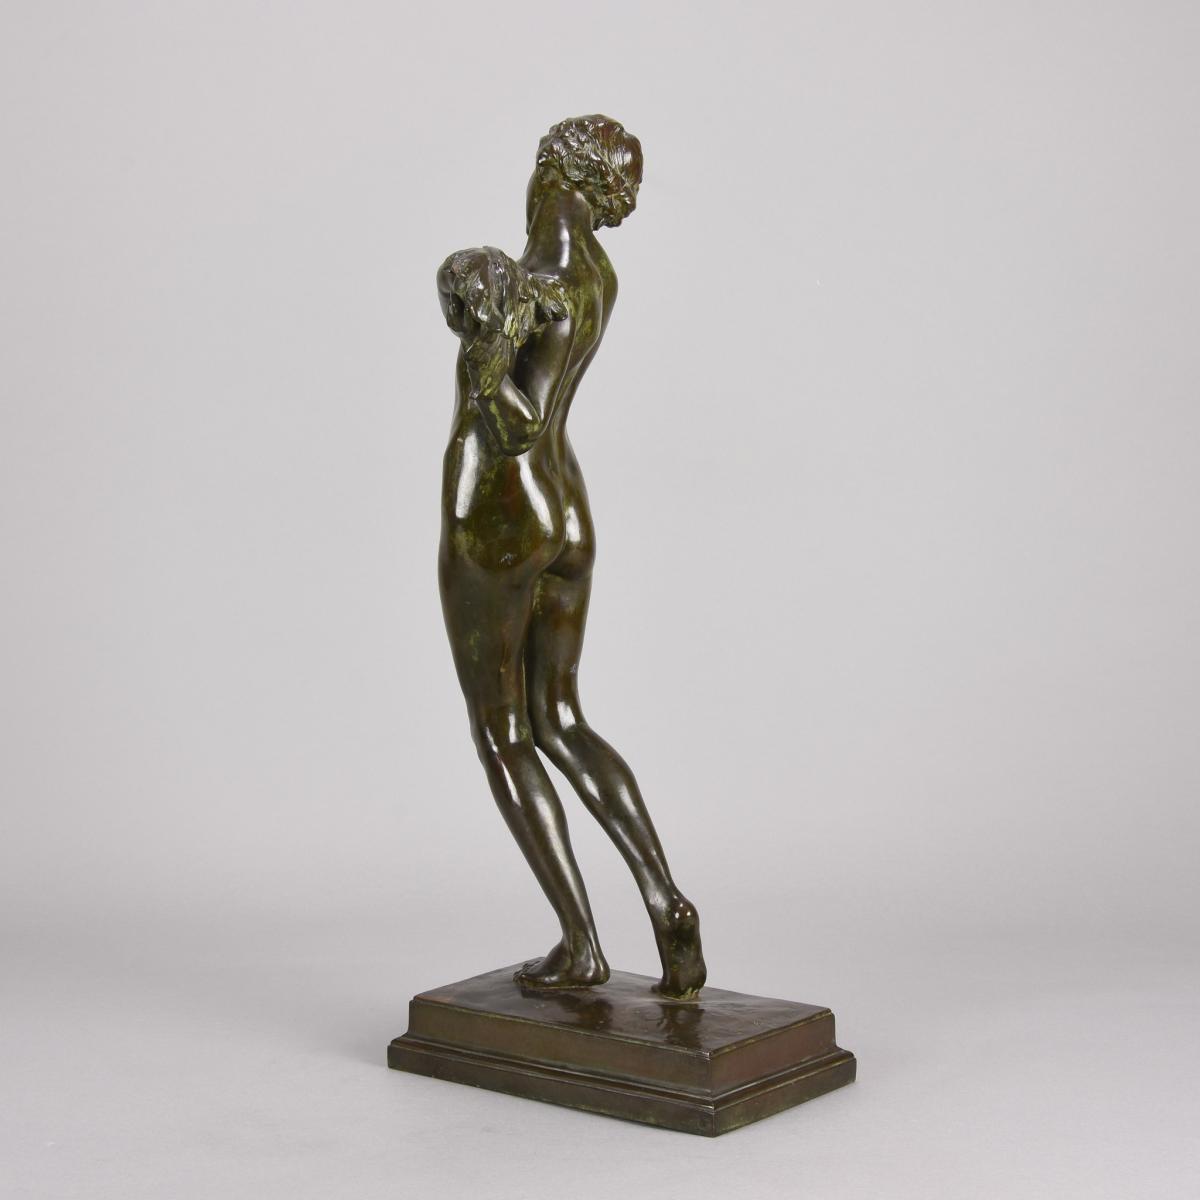 Early 20th Century Art Deco Bronze entitled "Harvest Girl" by Harold Brownsword